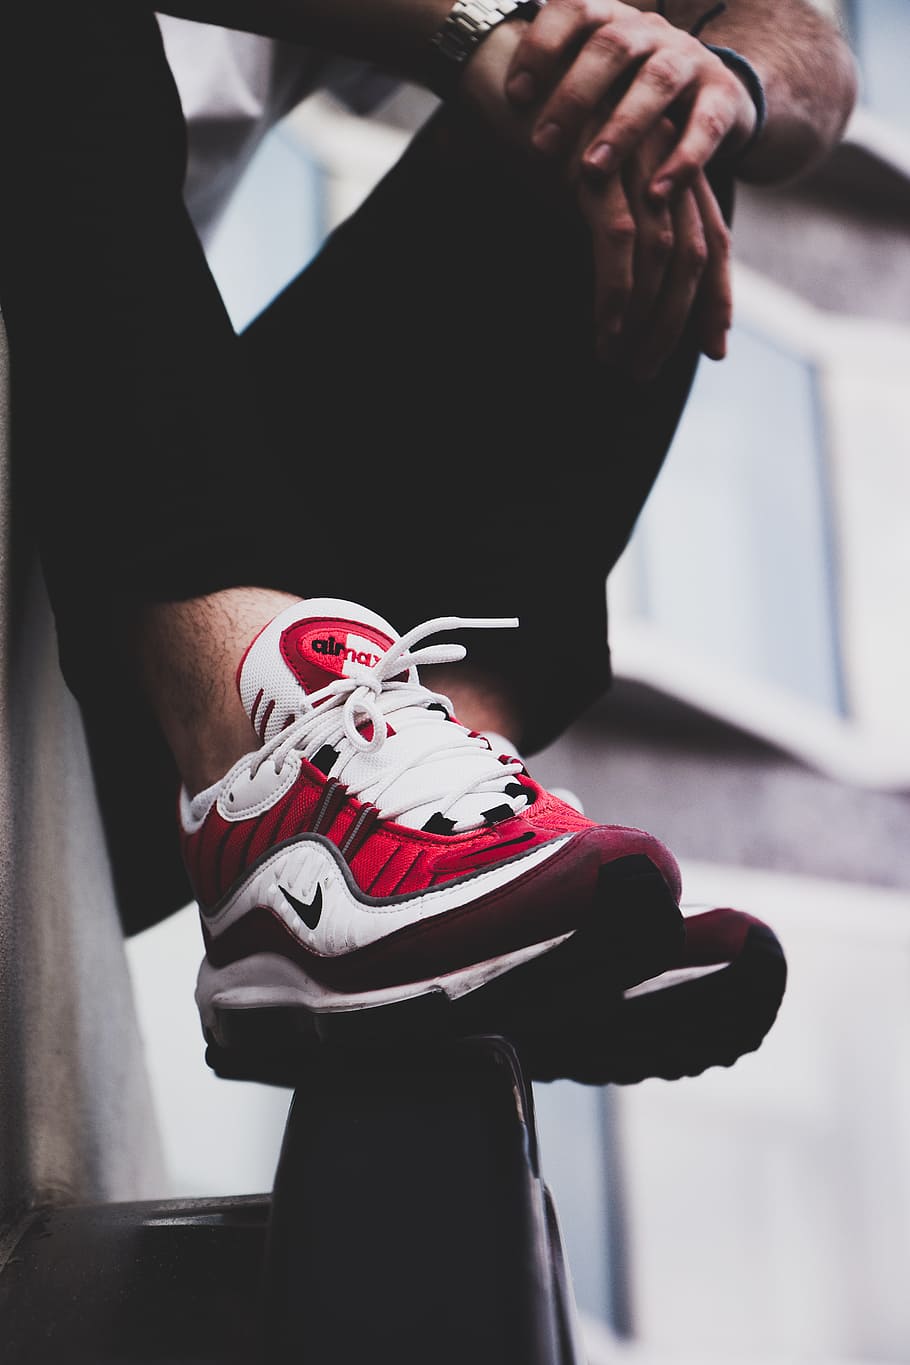 red-and-white Nike Air Max shoes\, photography, street, streetwear